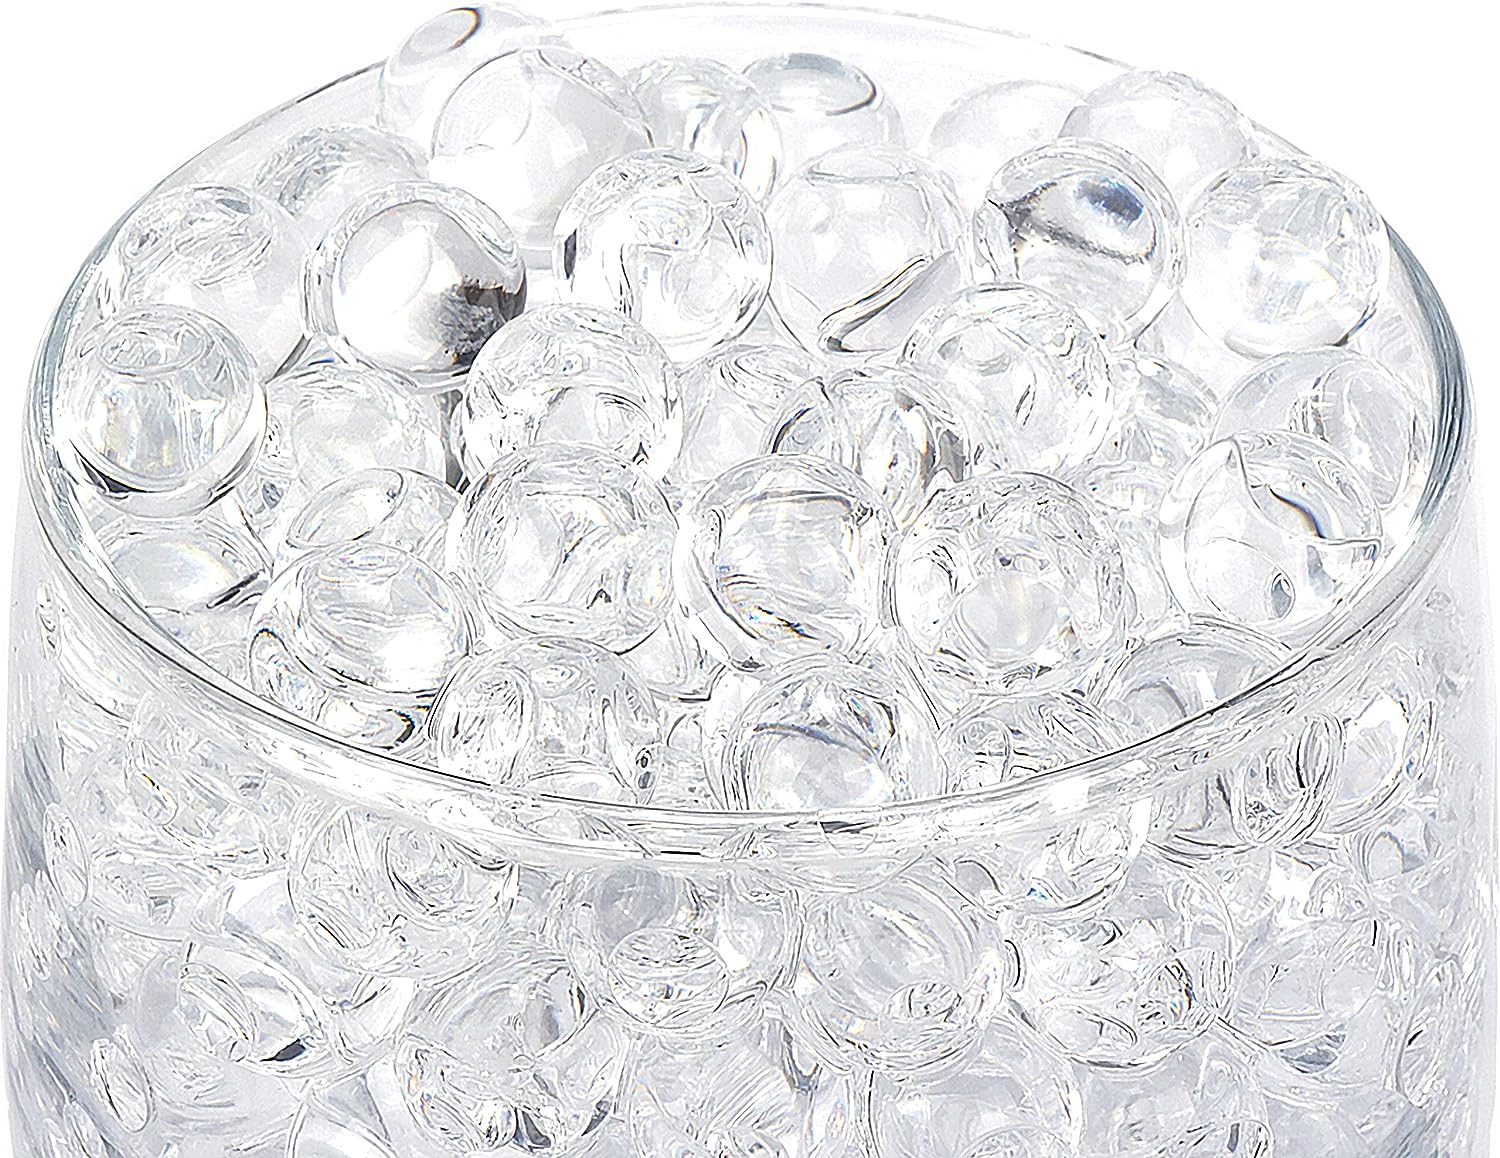 BYMORE 60000 clear water gel beads in a bowl on a white background.